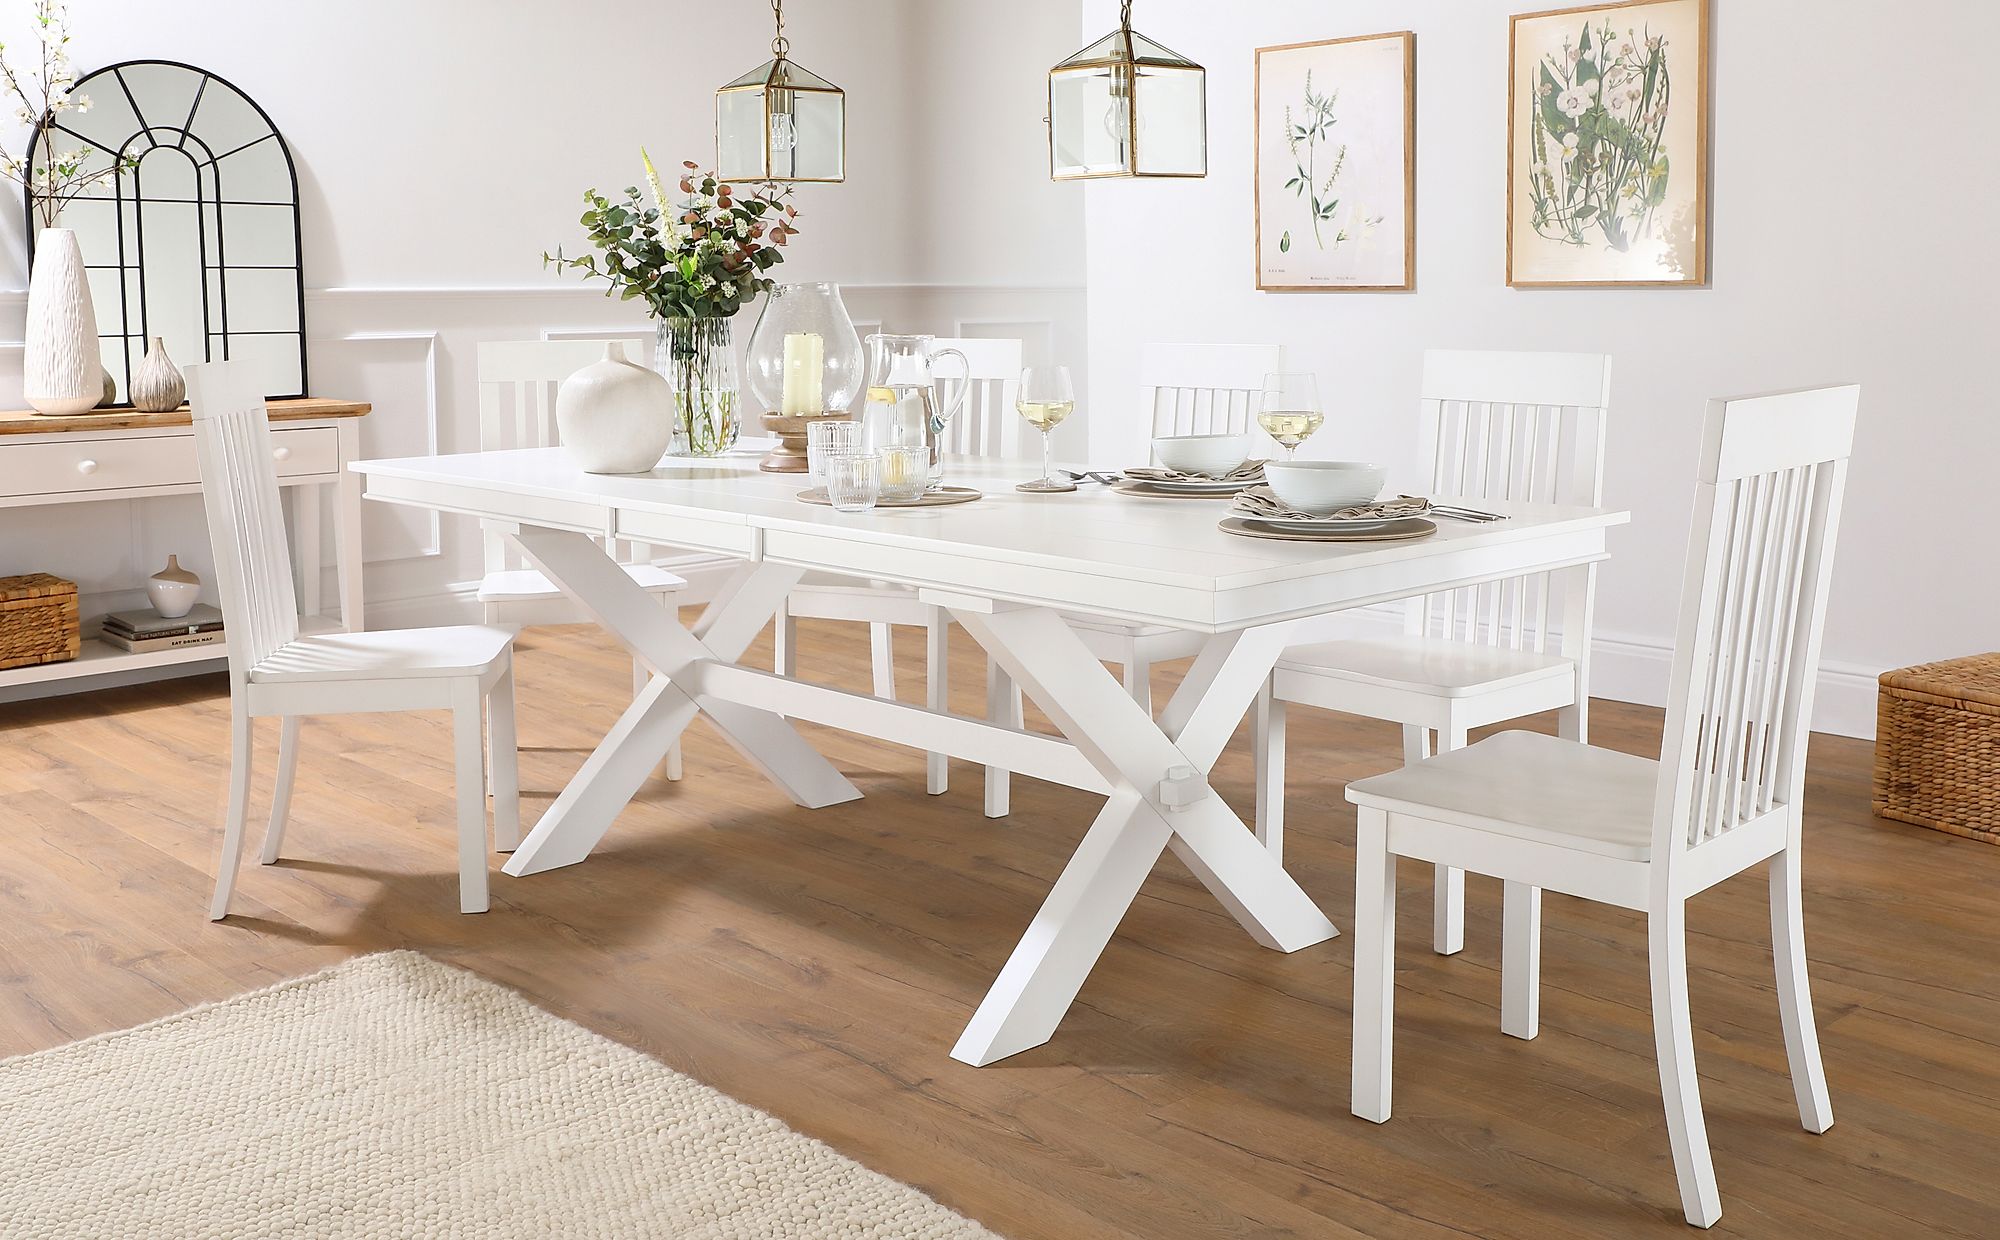 kitchen 6 chair table rustic white